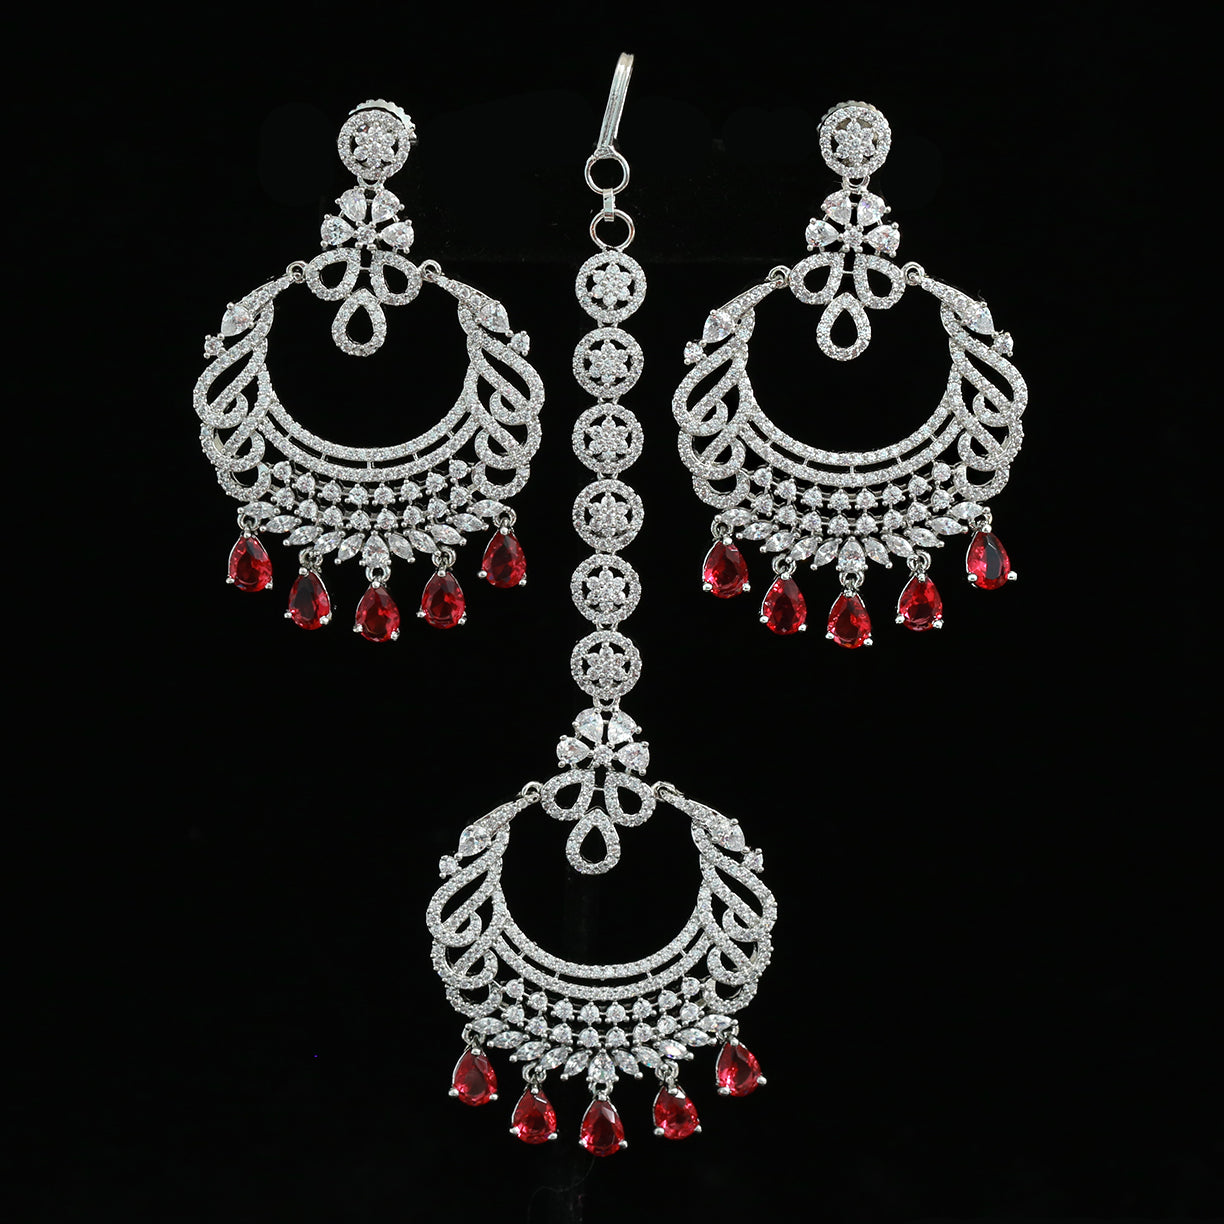 Three Layered 92.5 Sterling Silver Earrings Chandbali Pink Fuchsia  Intricate Floral Design